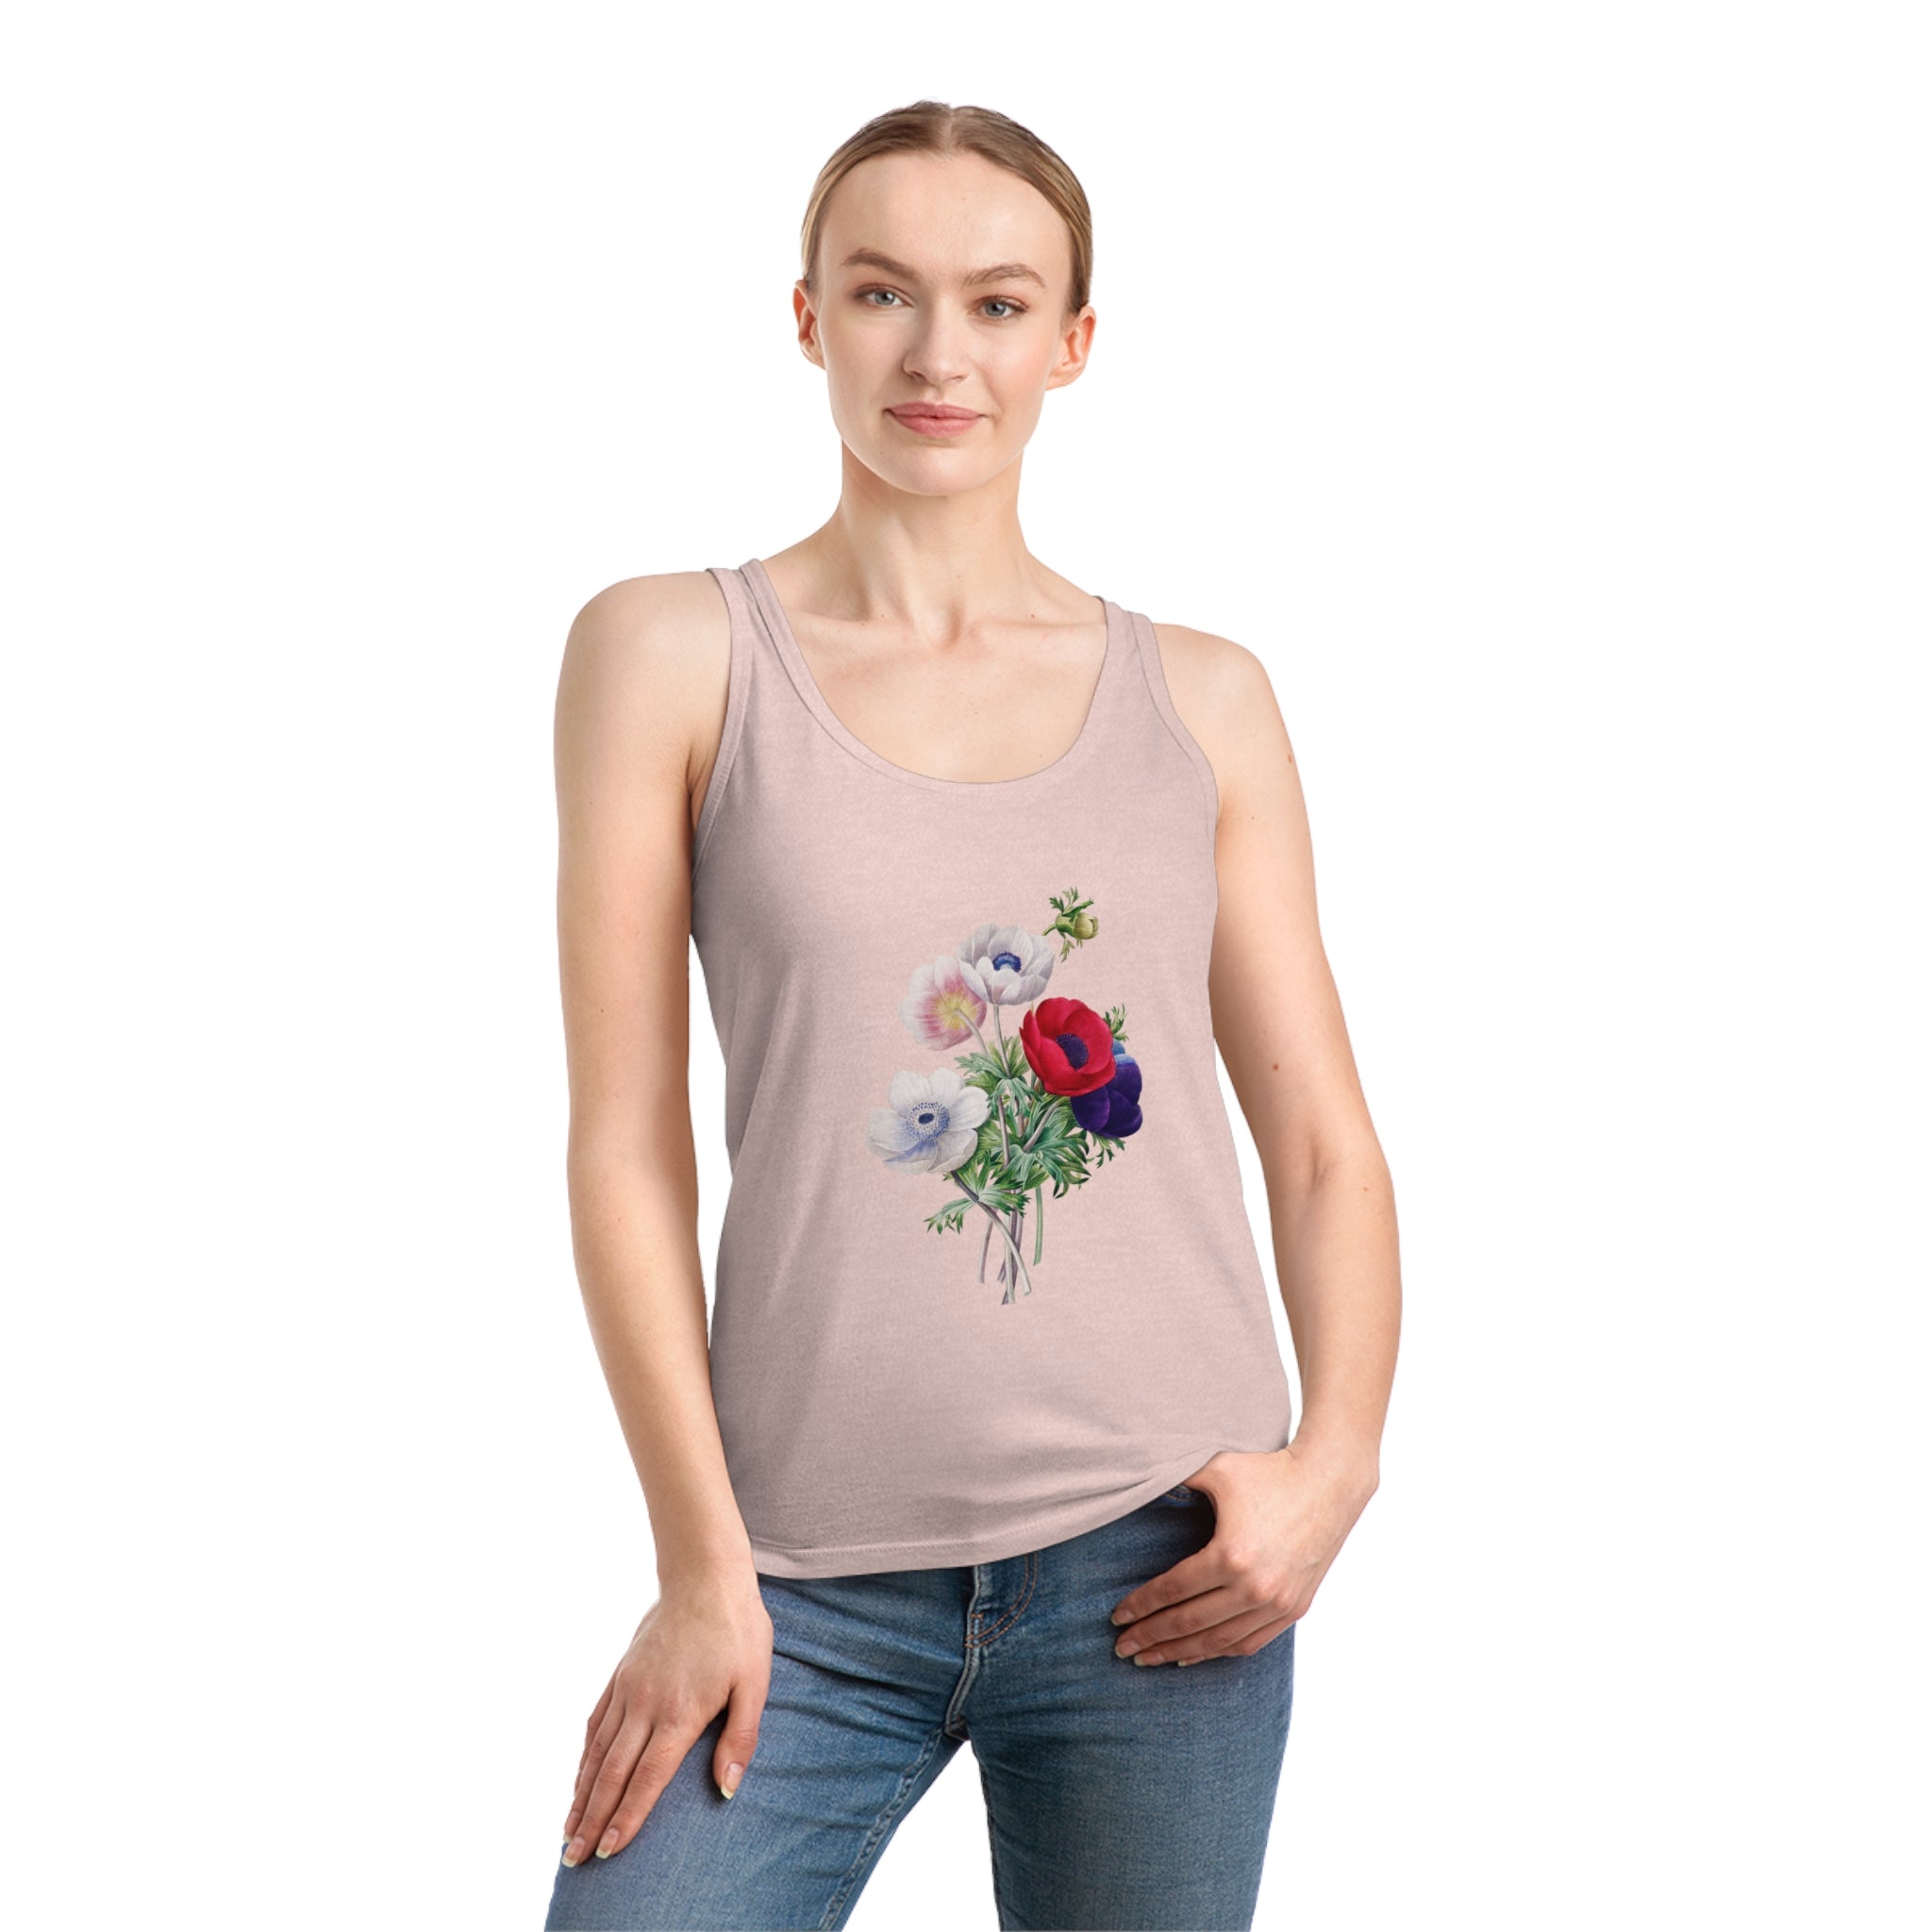 A woman wearing an Anemones Tank Top with flowers on it.